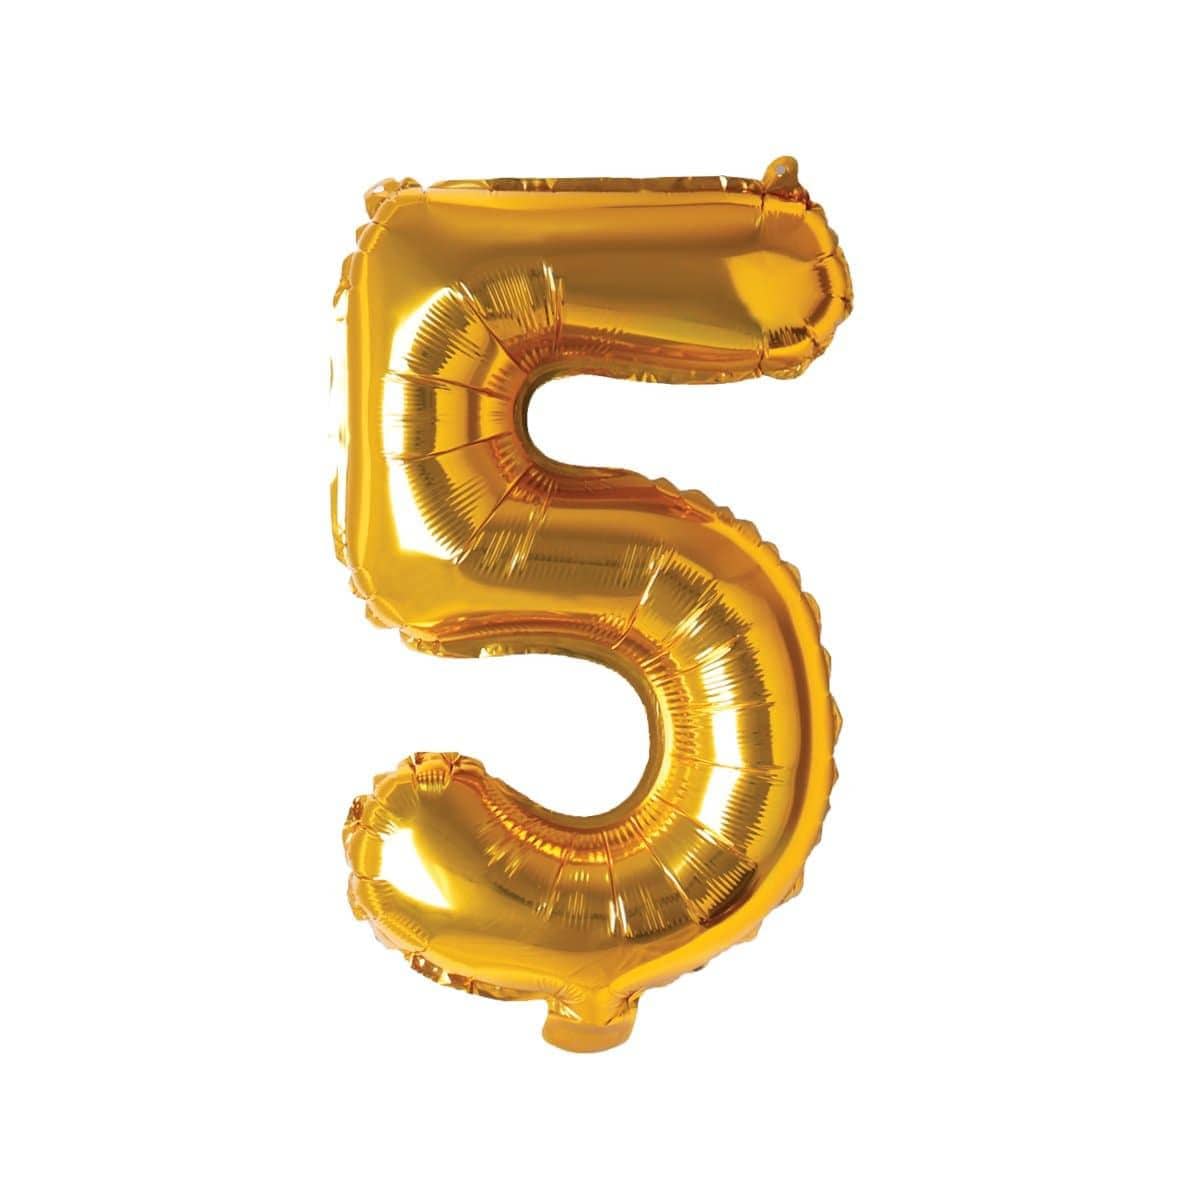 Buy Balloons Gold Number 5 Foil Balloon, 16 Inches sold at Party Expert